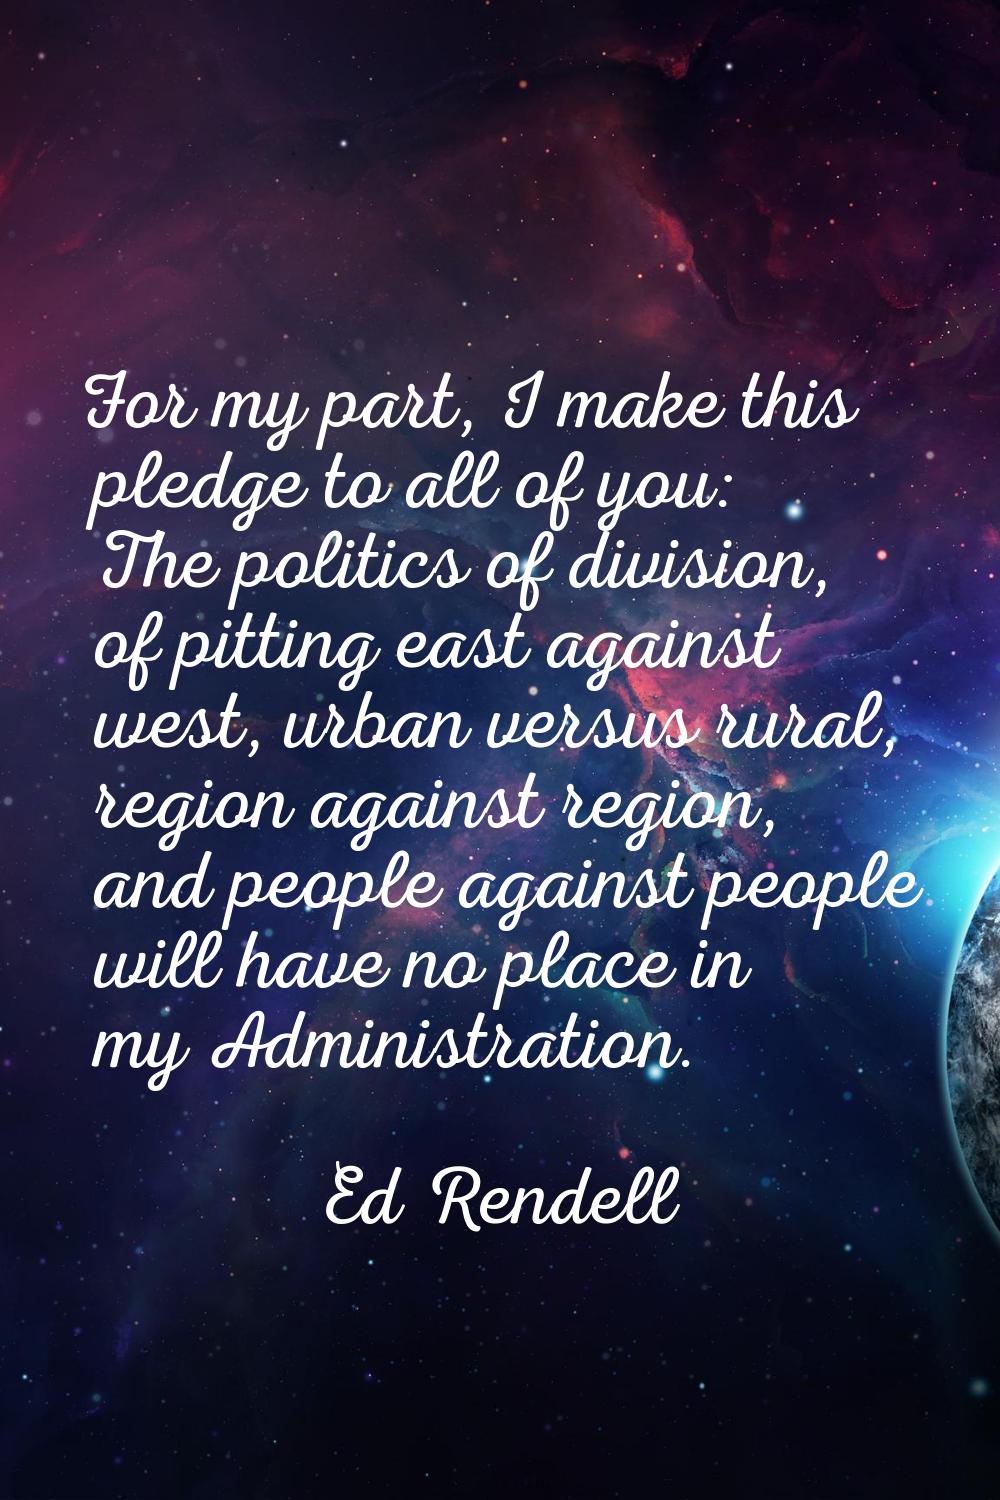 For my part, I make this pledge to all of you: The politics of division, of pitting east against we